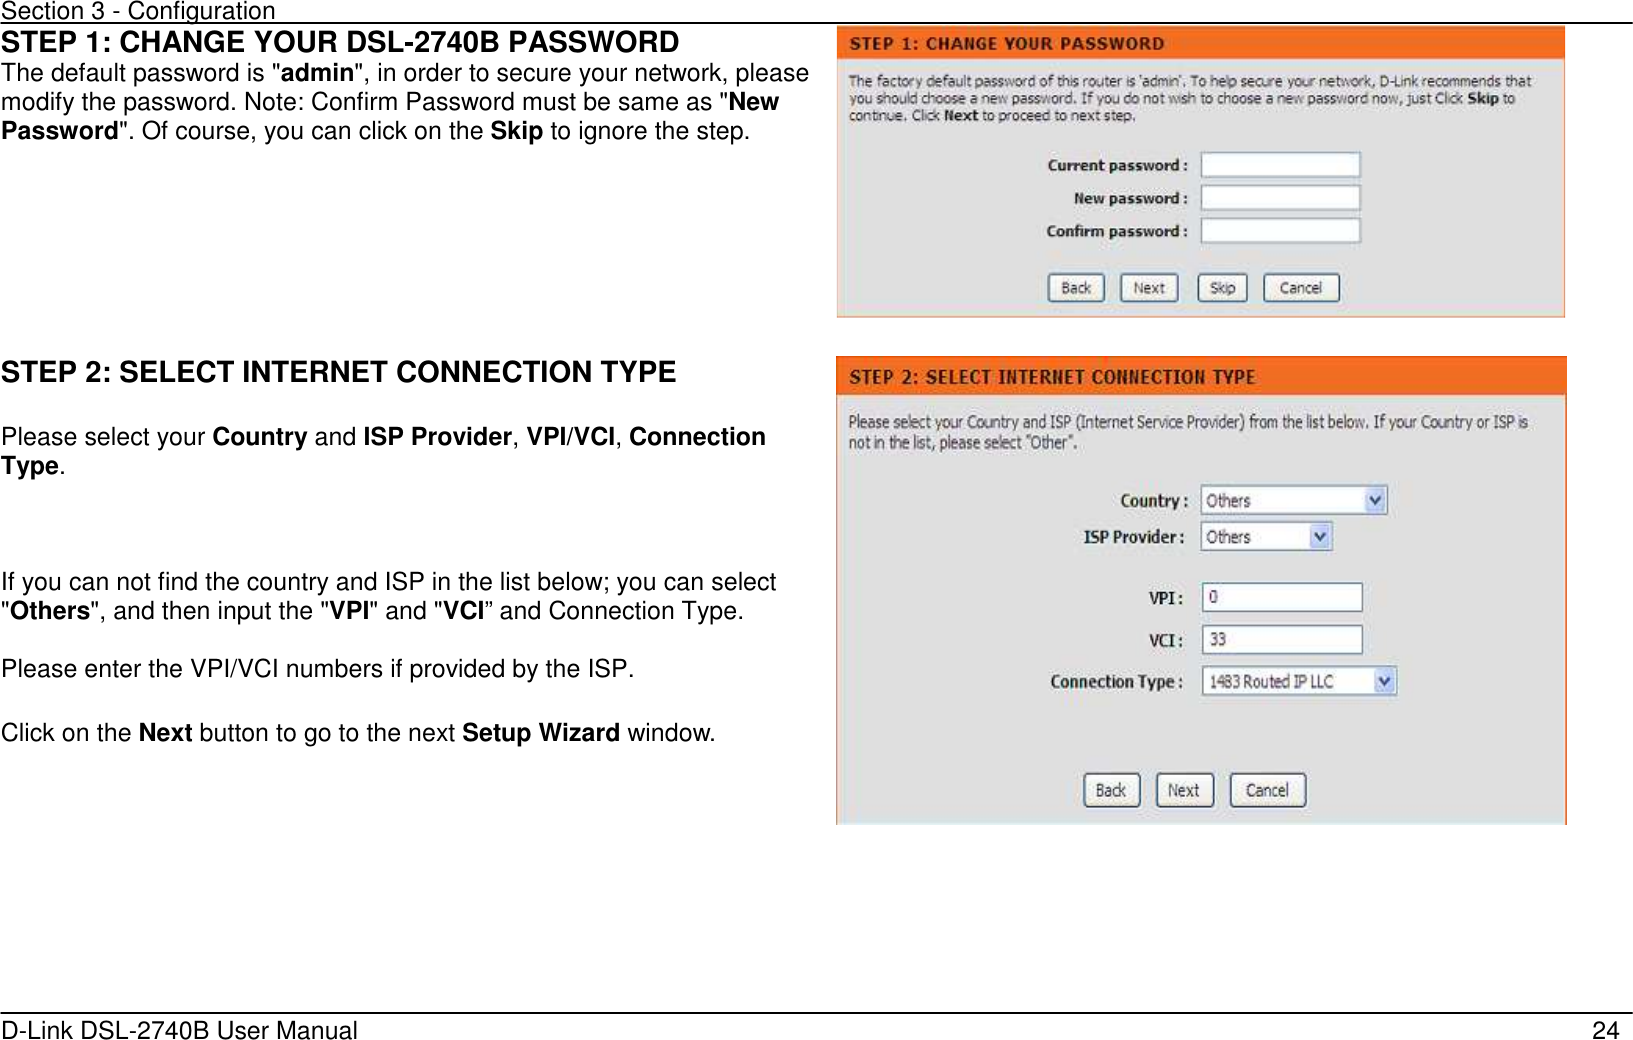 Section 3 - Configuration   D-Link DSL-2740B User Manual                                                  24 STEP 1: CHANGE YOUR DSL-2740B PASSWORD The default password is &quot;admin&quot;, in order to secure your network, please modify the password. Note: Confirm Password must be same as &quot;New Password&quot;. Of course, you can click on the Skip to ignore the step.      STEP 2: SELECT INTERNET CONNECTION TYPE  Please select your Country and ISP Provider, VPI/VCI, Connection Type.  If you can not find the country and ISP in the list below; you can select &quot;Others&quot;, and then input the &quot;VPI&quot; and &quot;VCI” and Connection Type. Please enter the VPI/VCI numbers if provided by the ISP.  Click on the Next button to go to the next Setup Wizard window.       